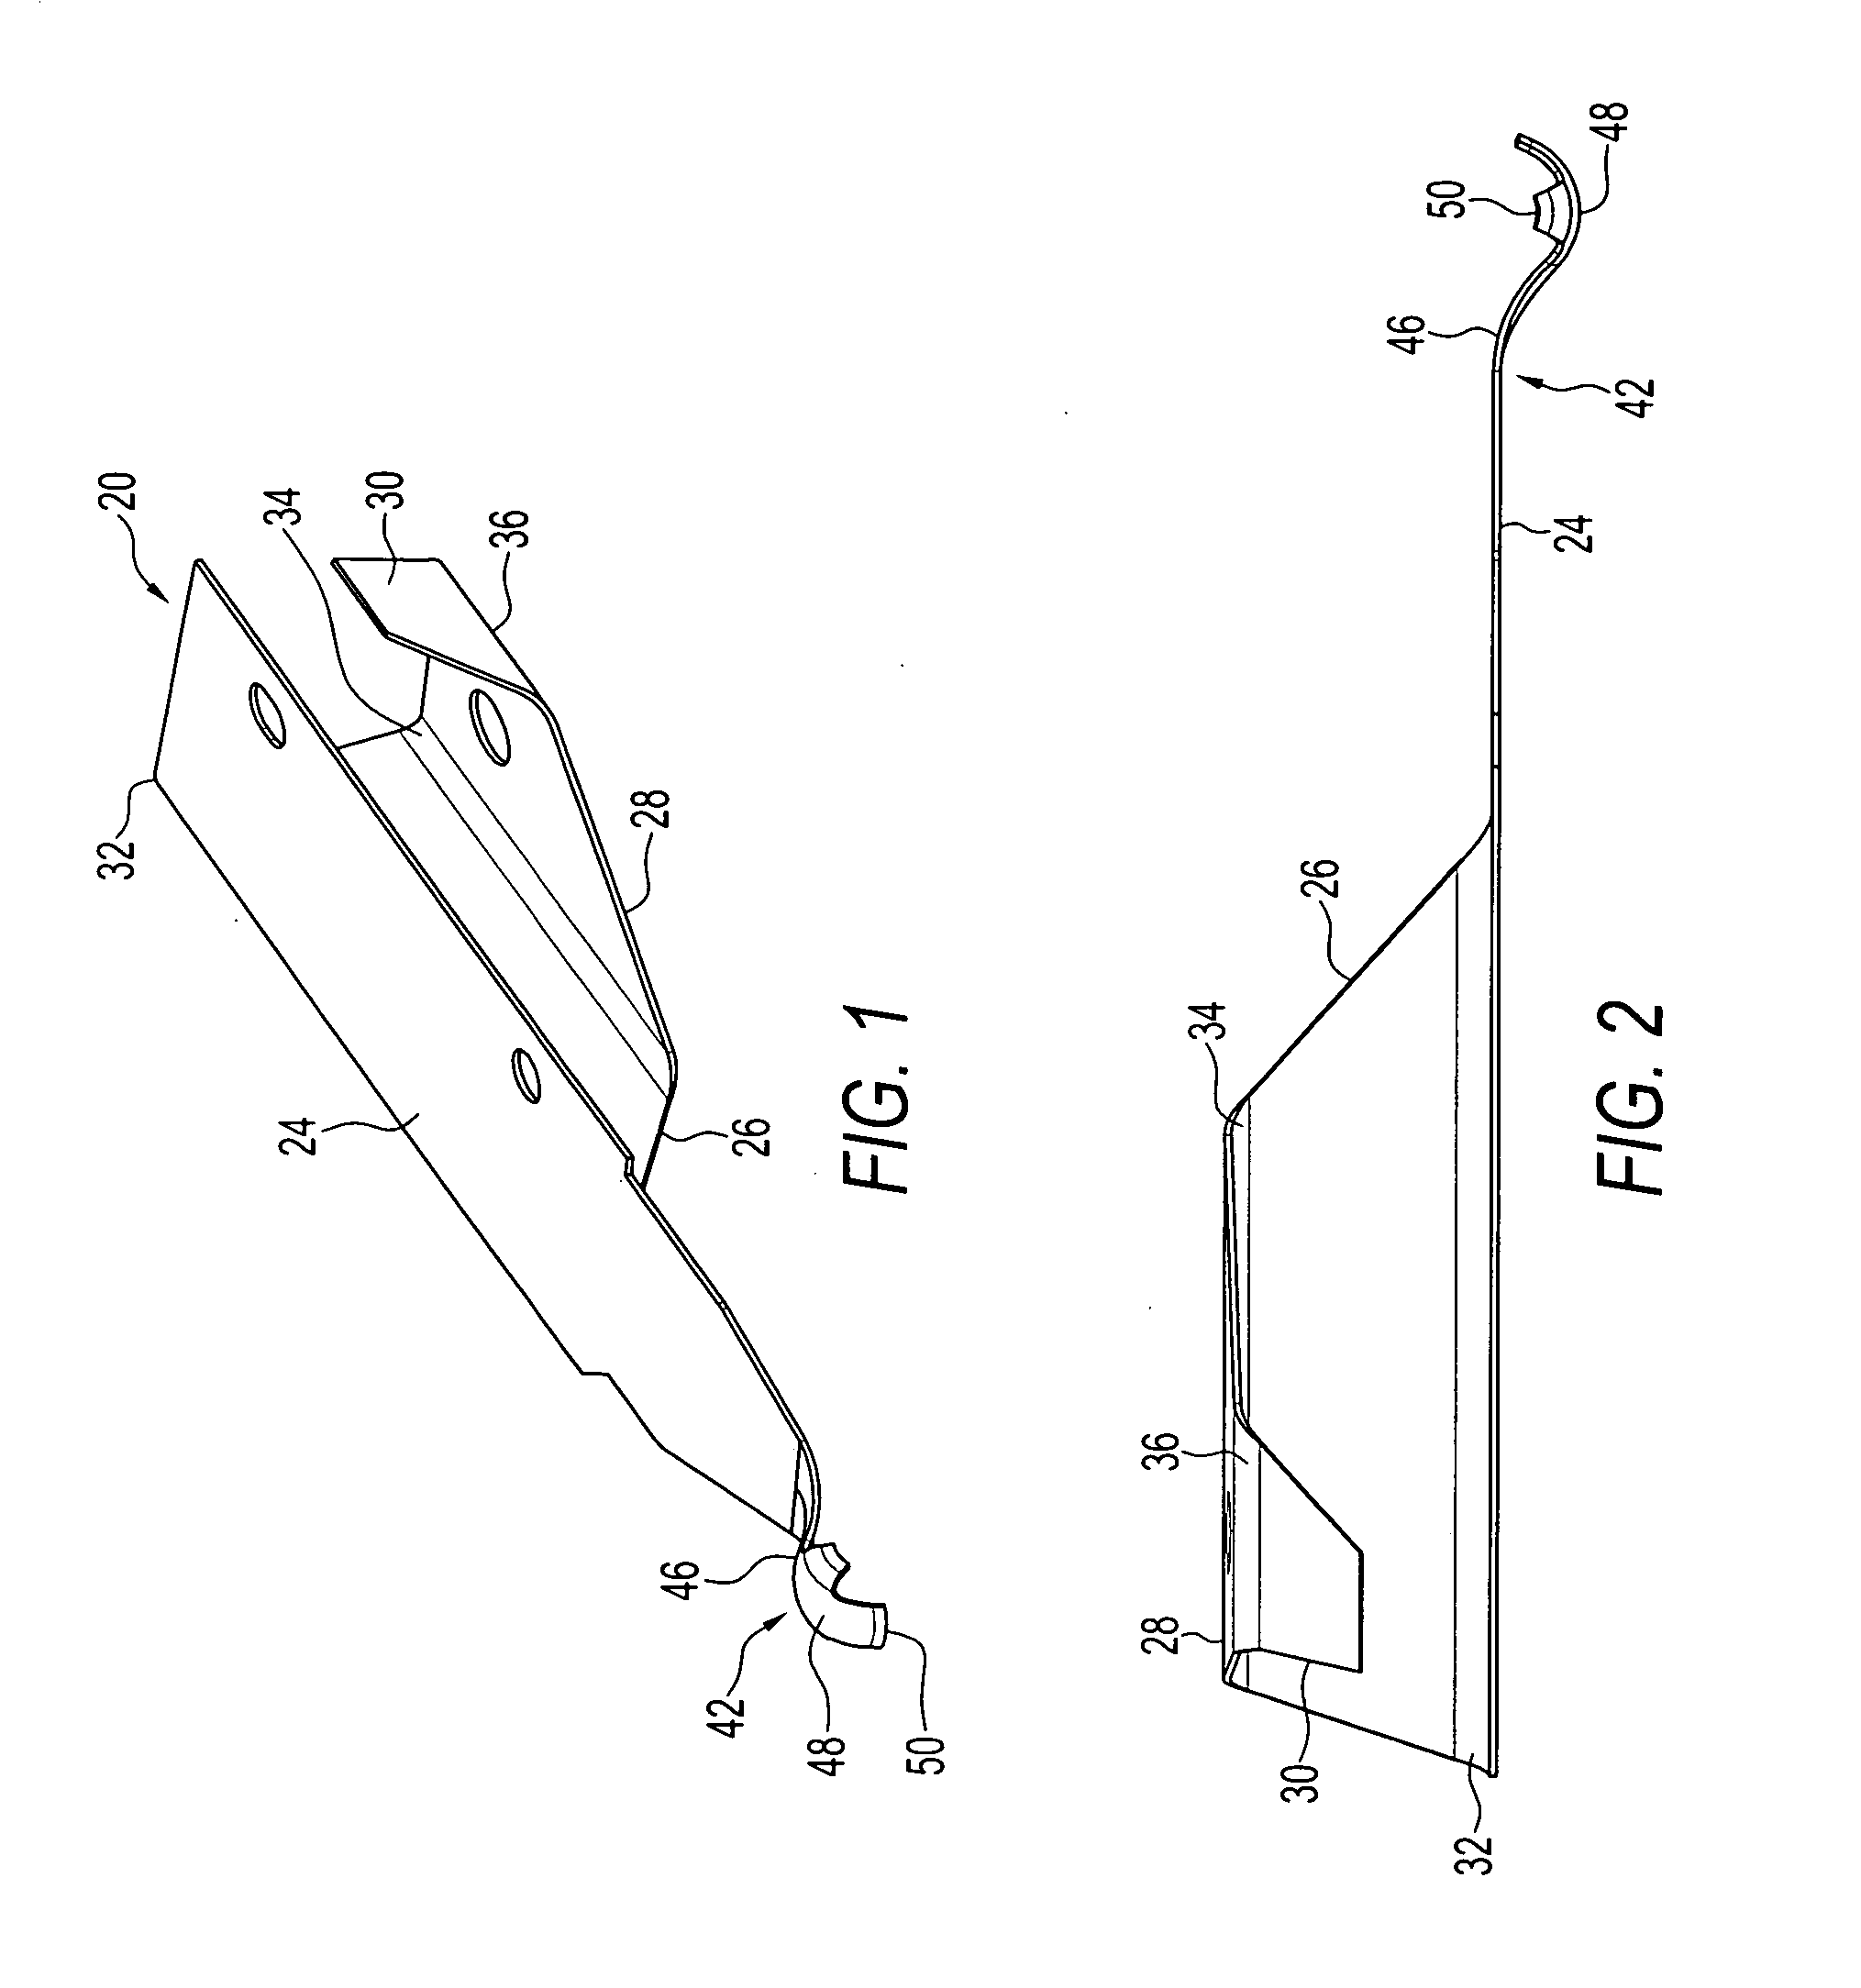 Multiple band antenna and antenna assembly